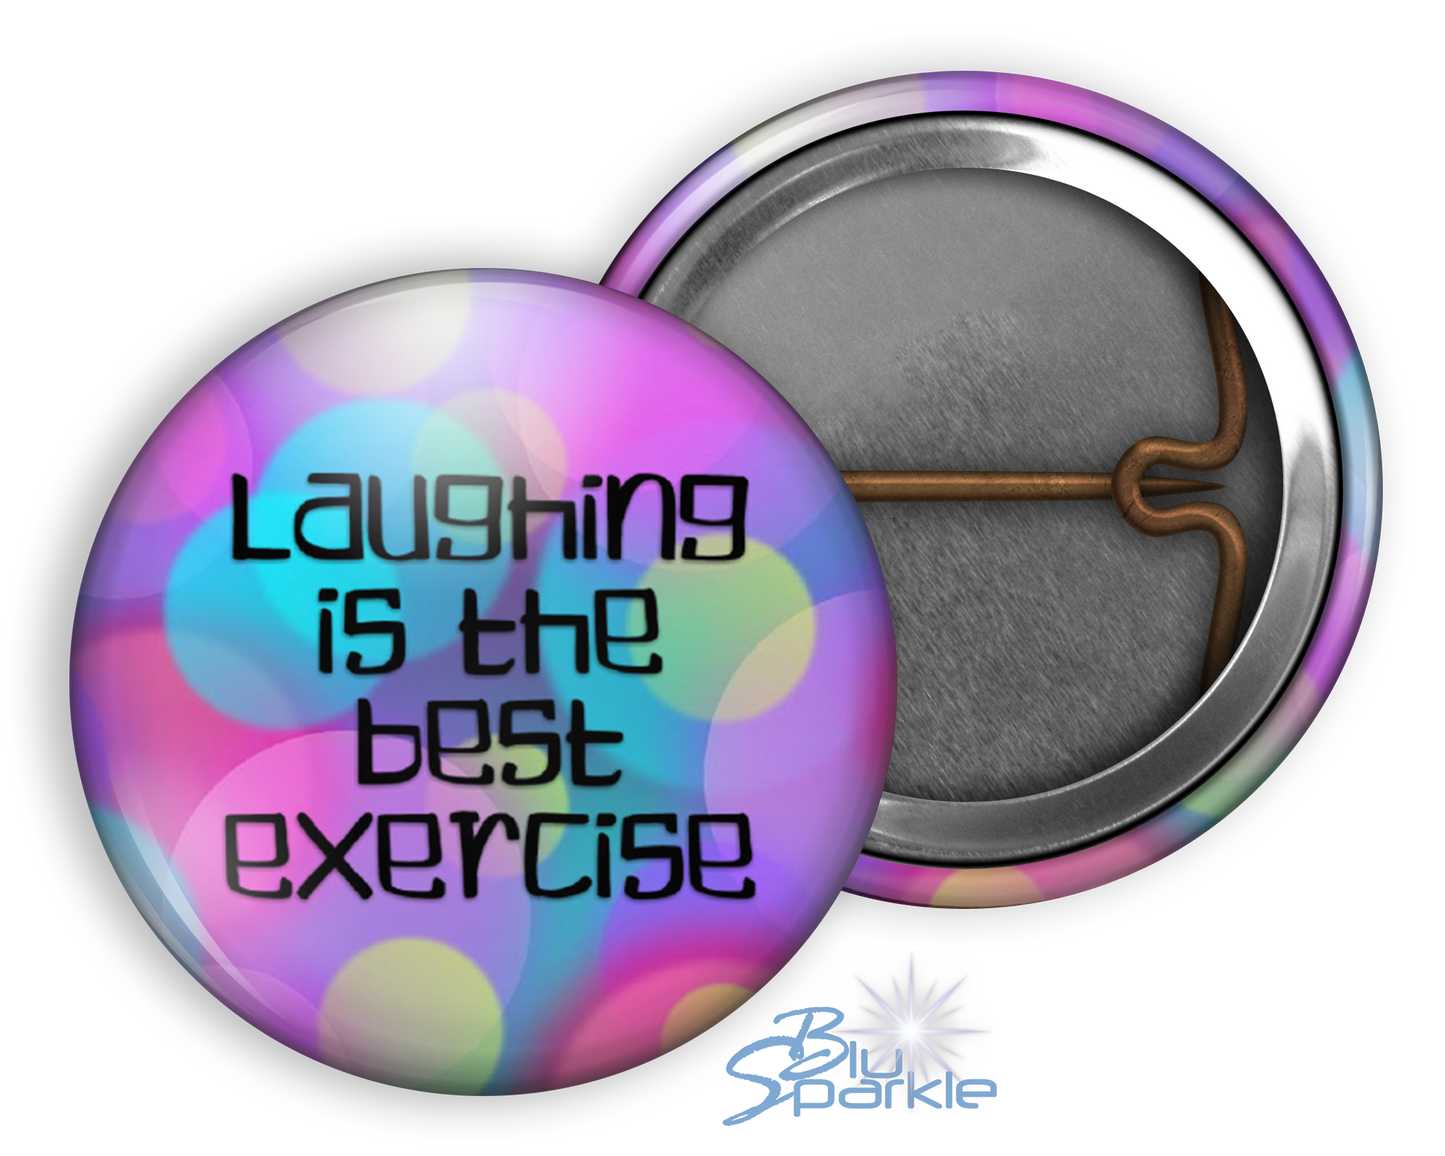 Laughing Is The Best Exercise - Pinback Buttons